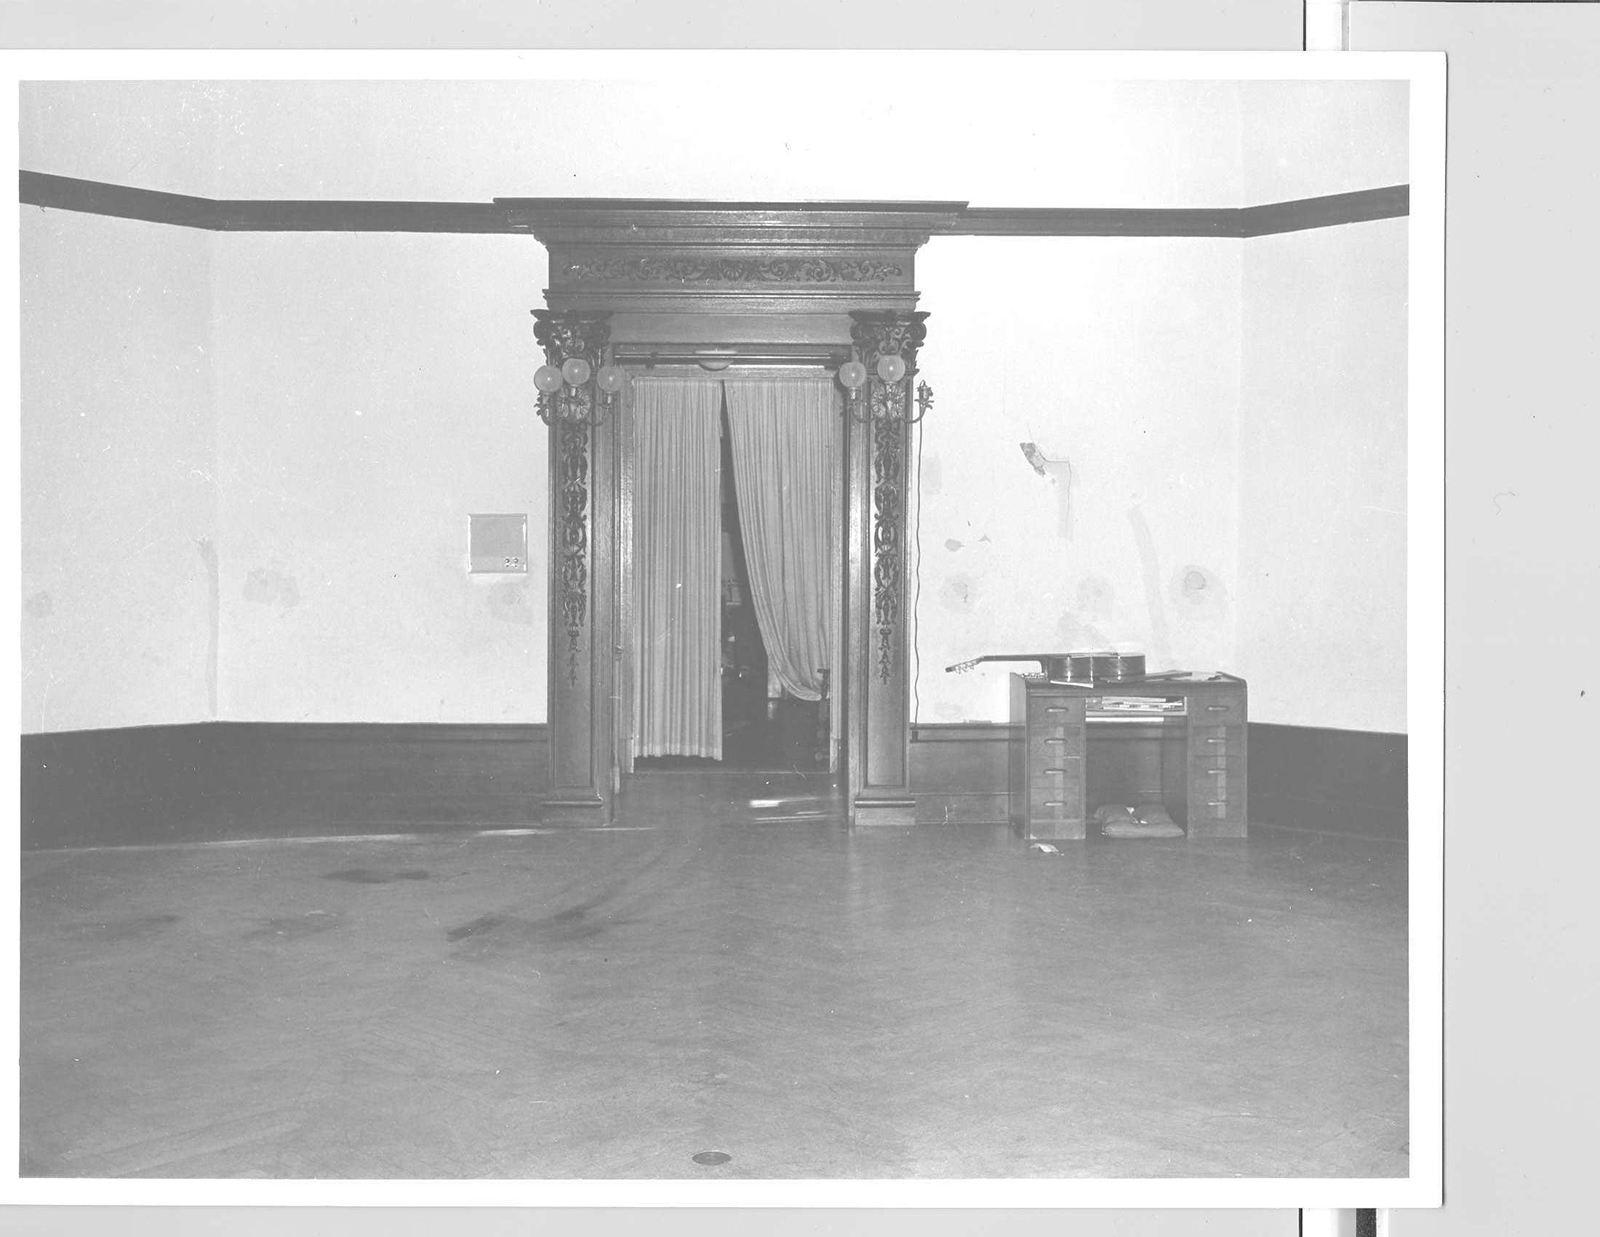 Blood stains are visible on the floor of the ballroom after the bodies and sleeping bags were removed.